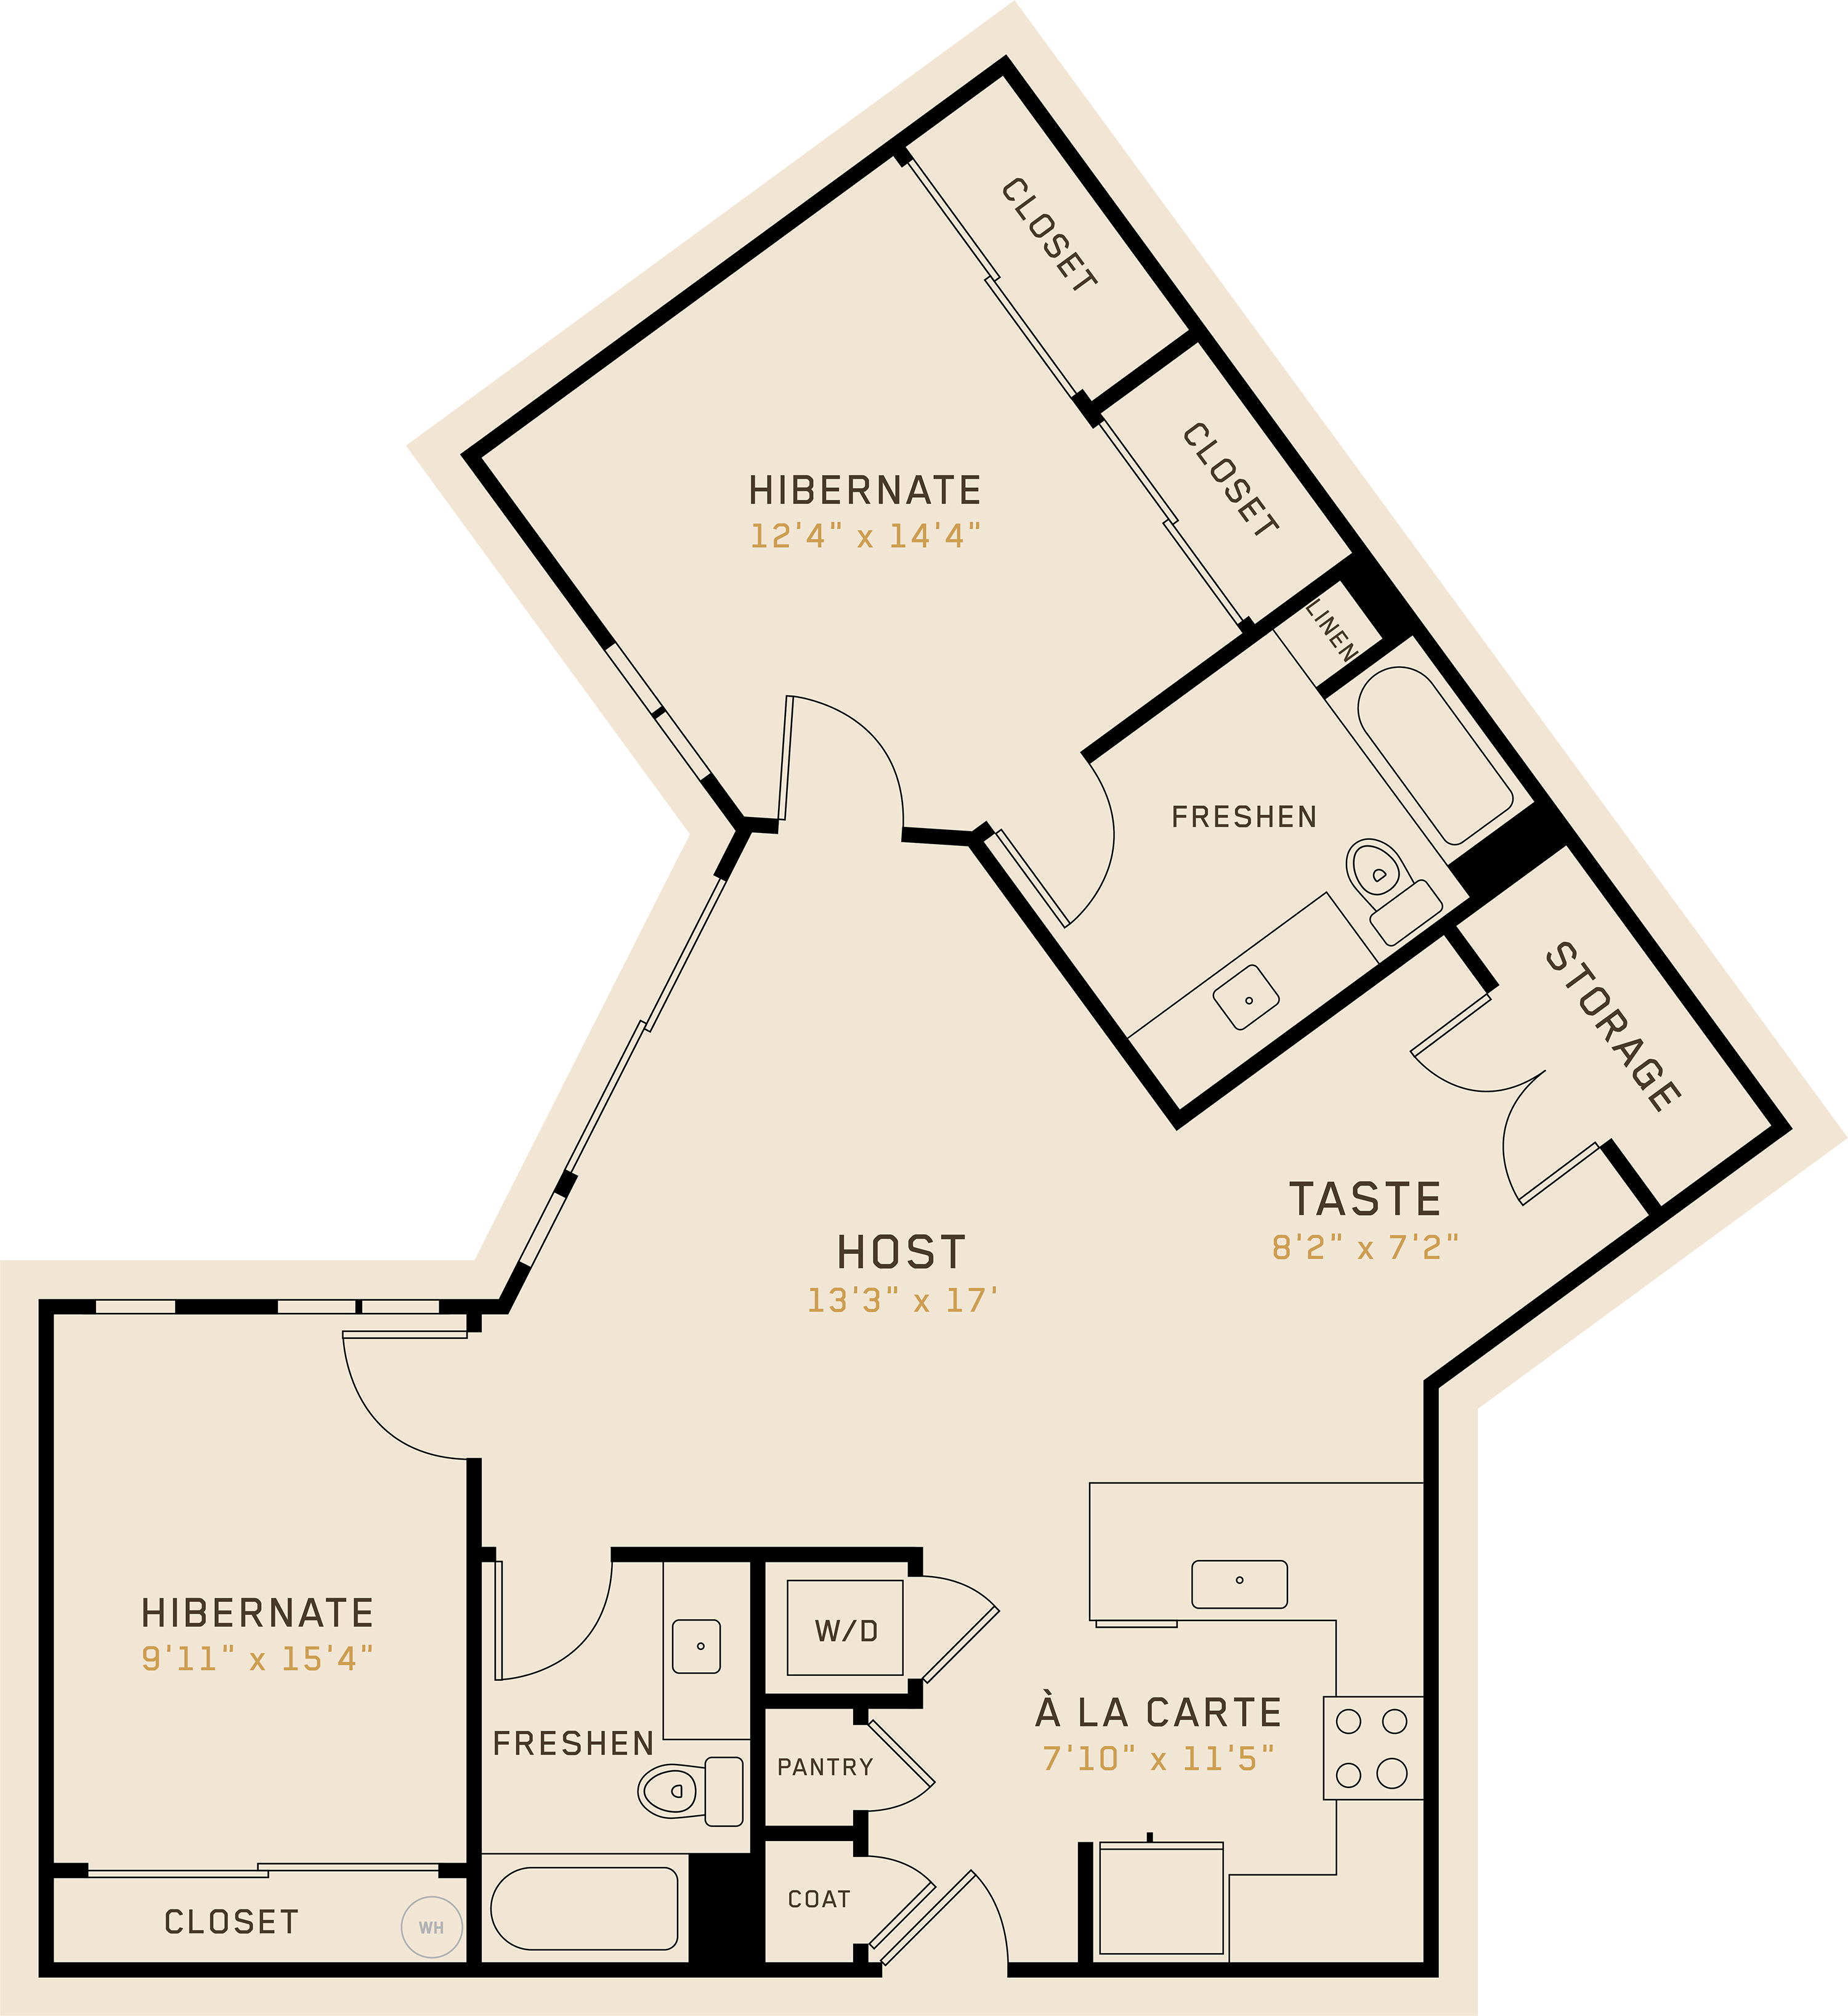 B2M floor plan featuring 2 bedrooms, 2 bathrooms, and is 1,267 square feet